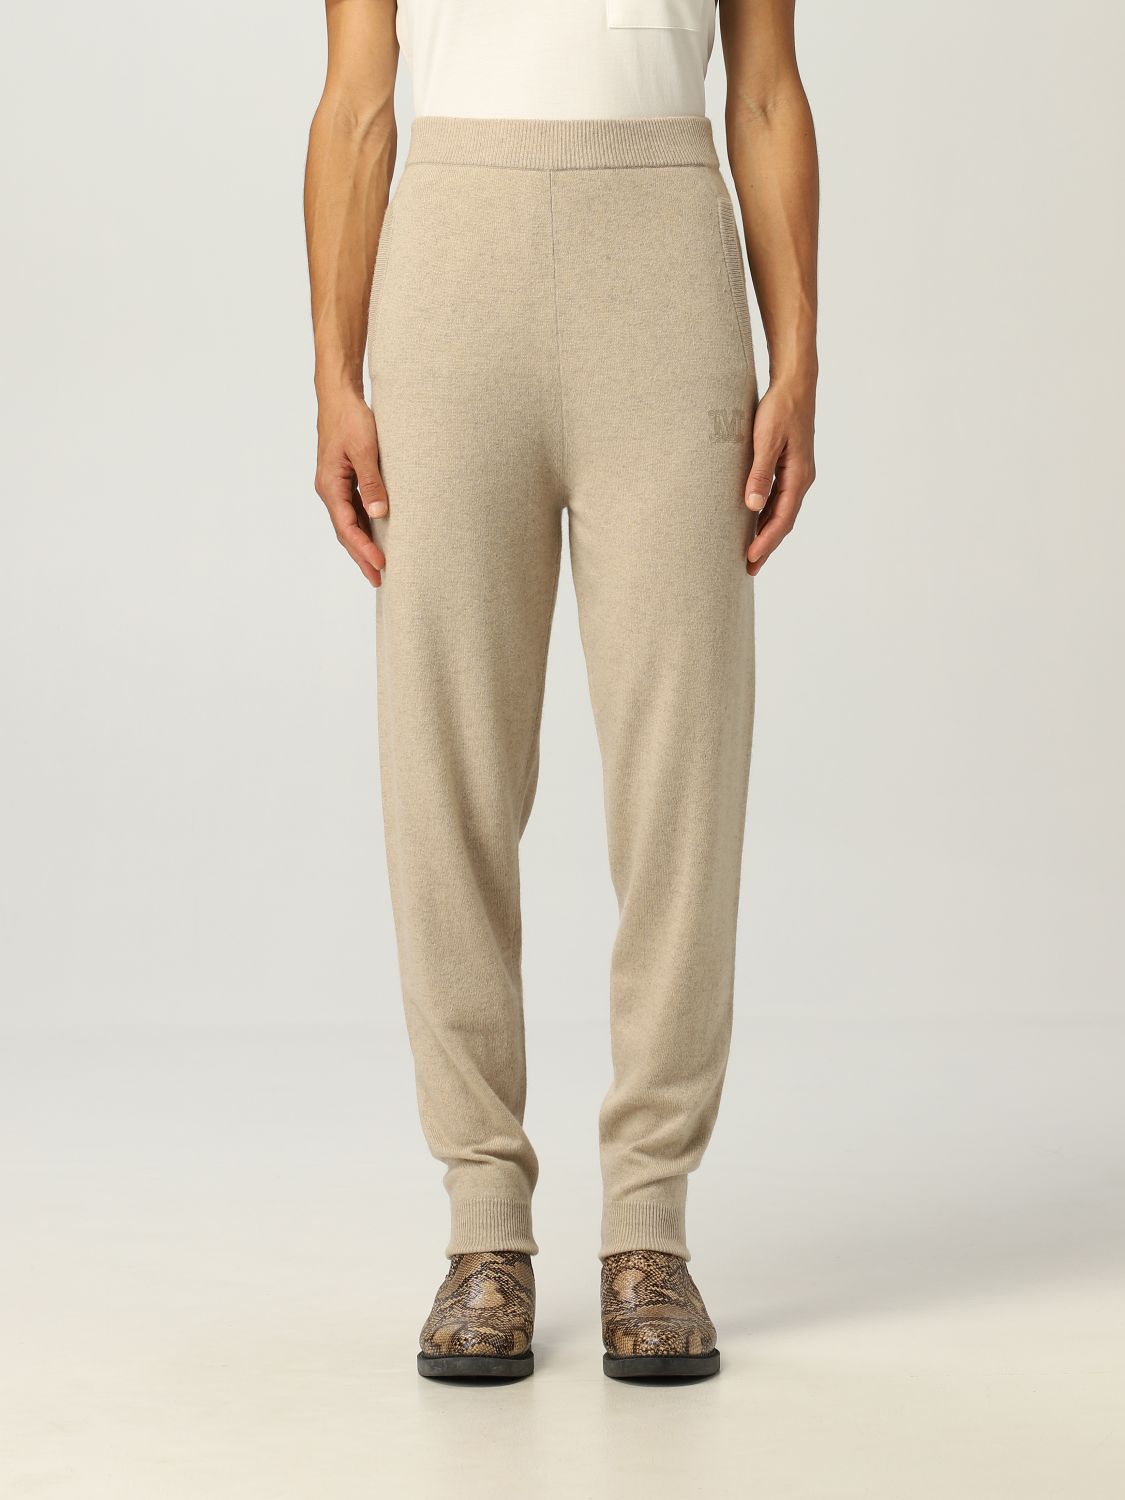 Max Mara Trousers In Wool And Cashmere